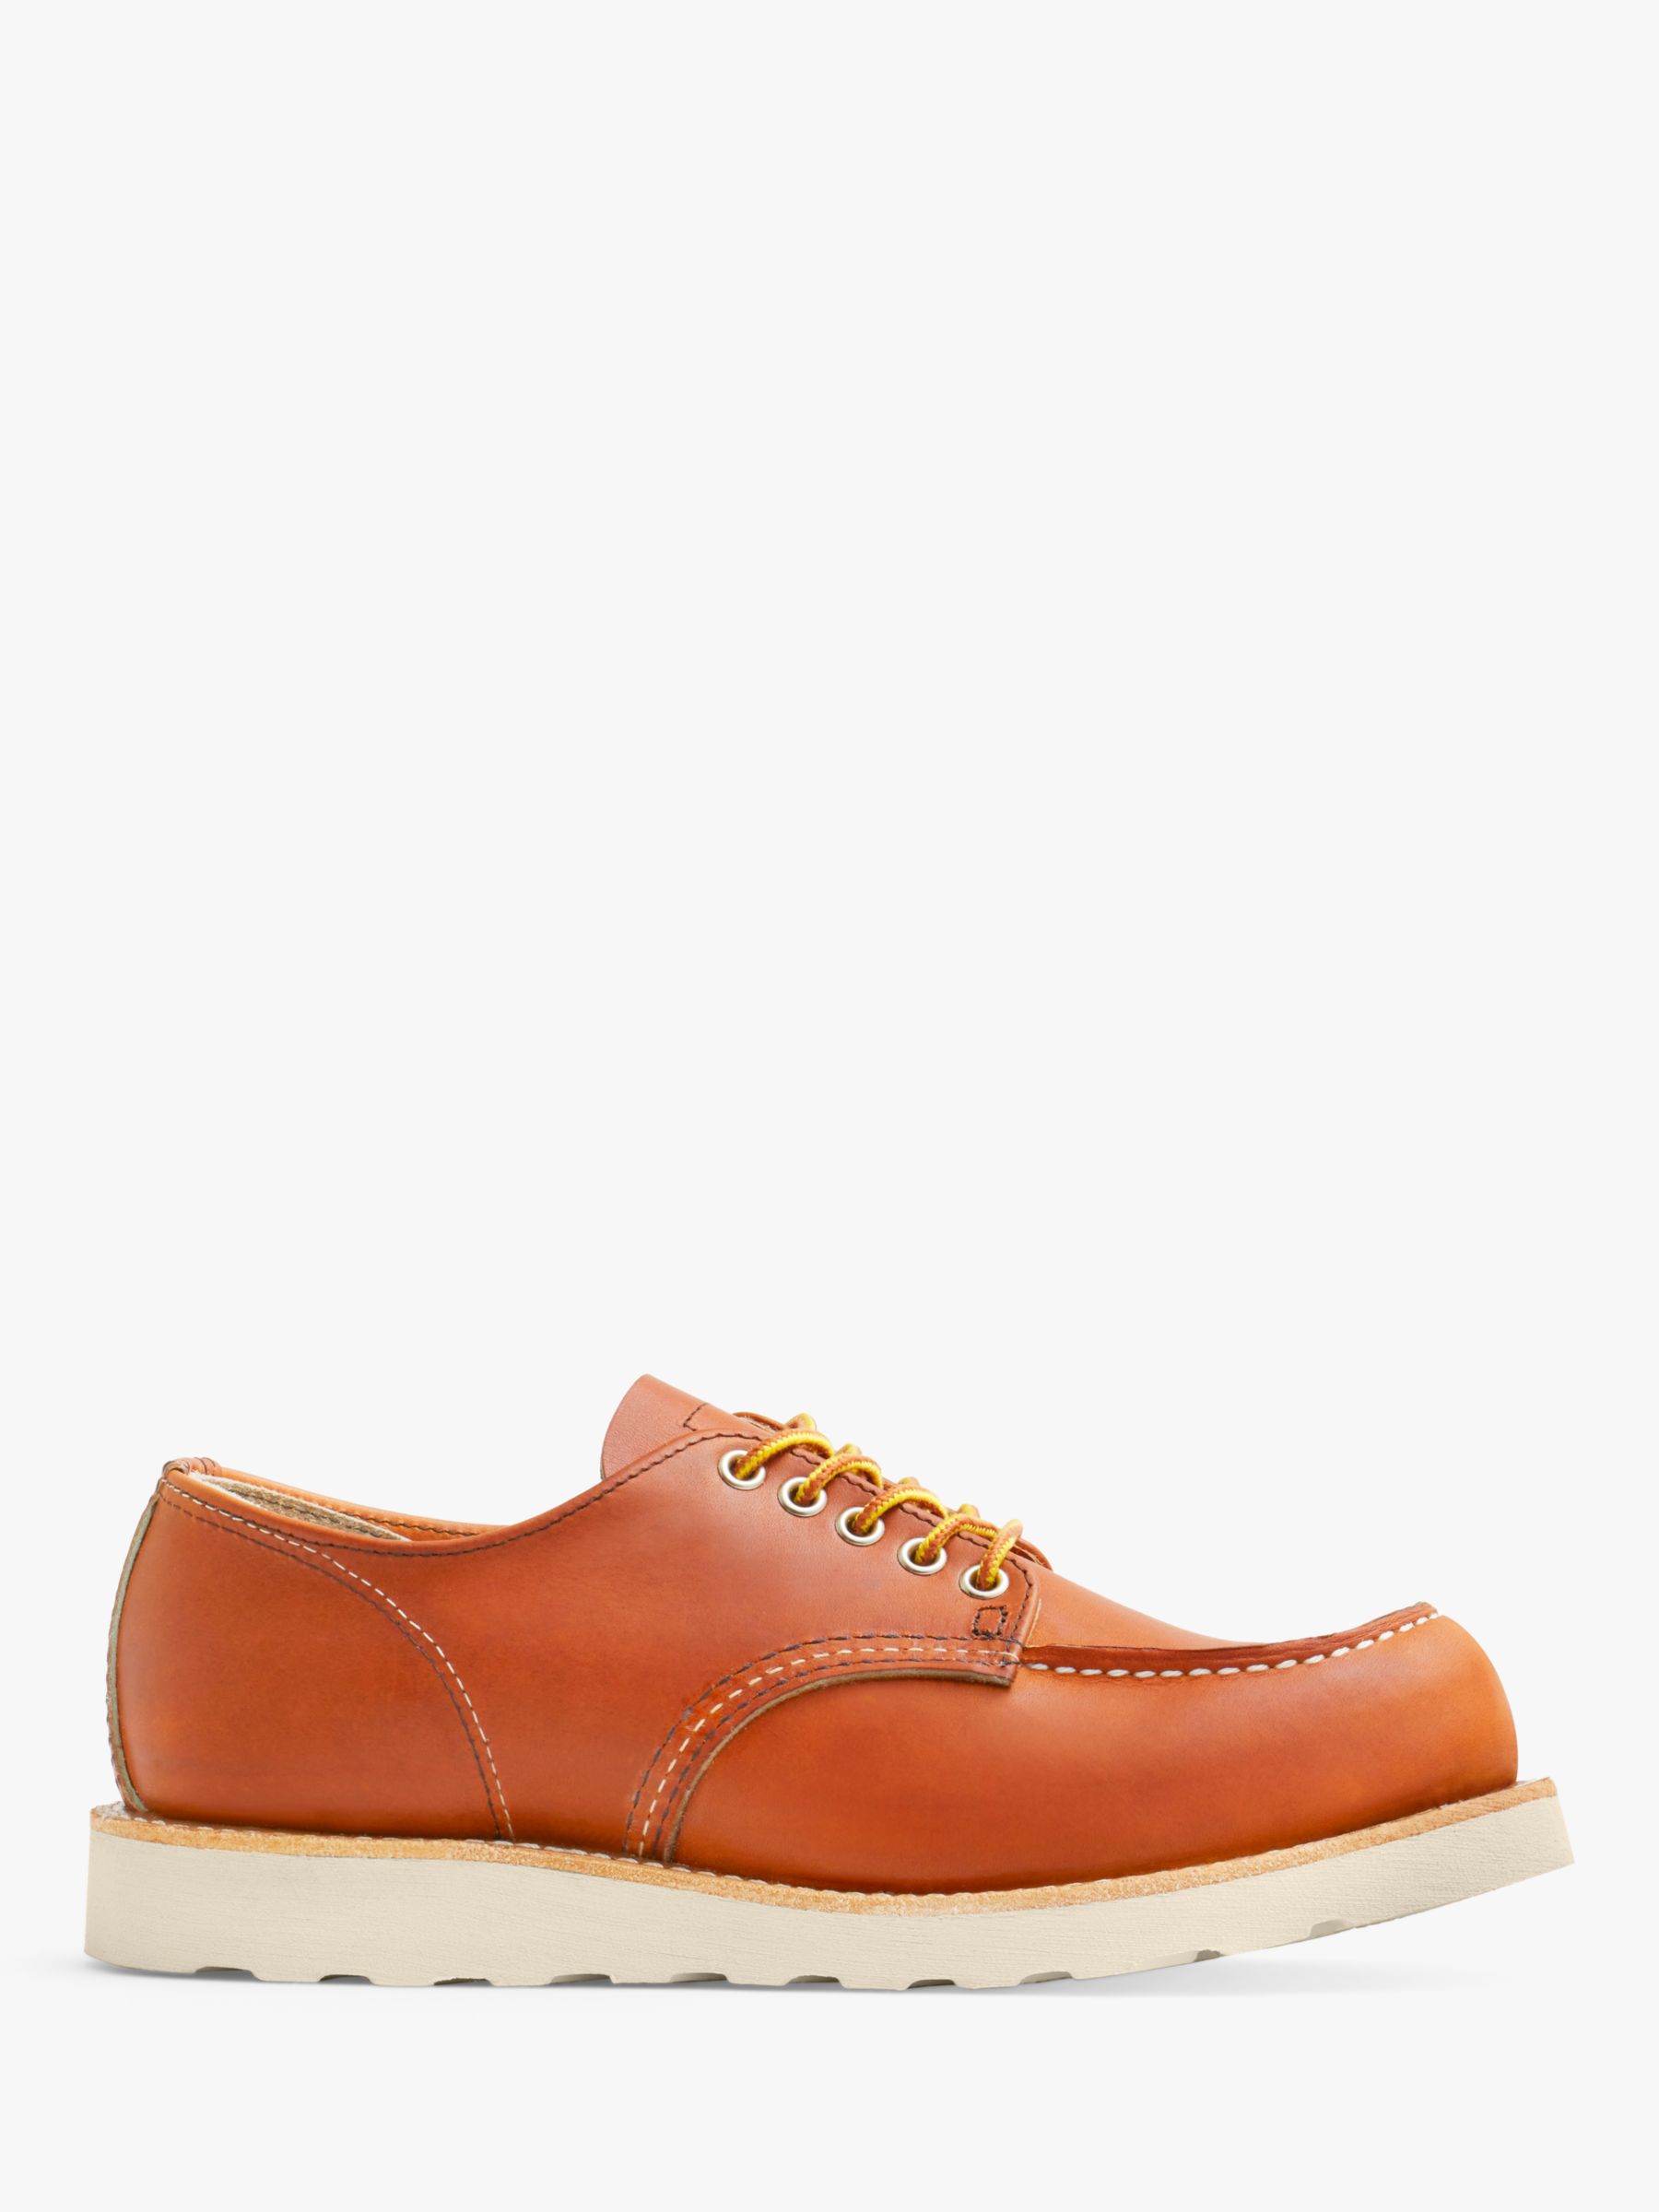 Red Wing Heritage Work Classic Oxford Shoe, Tan, 8